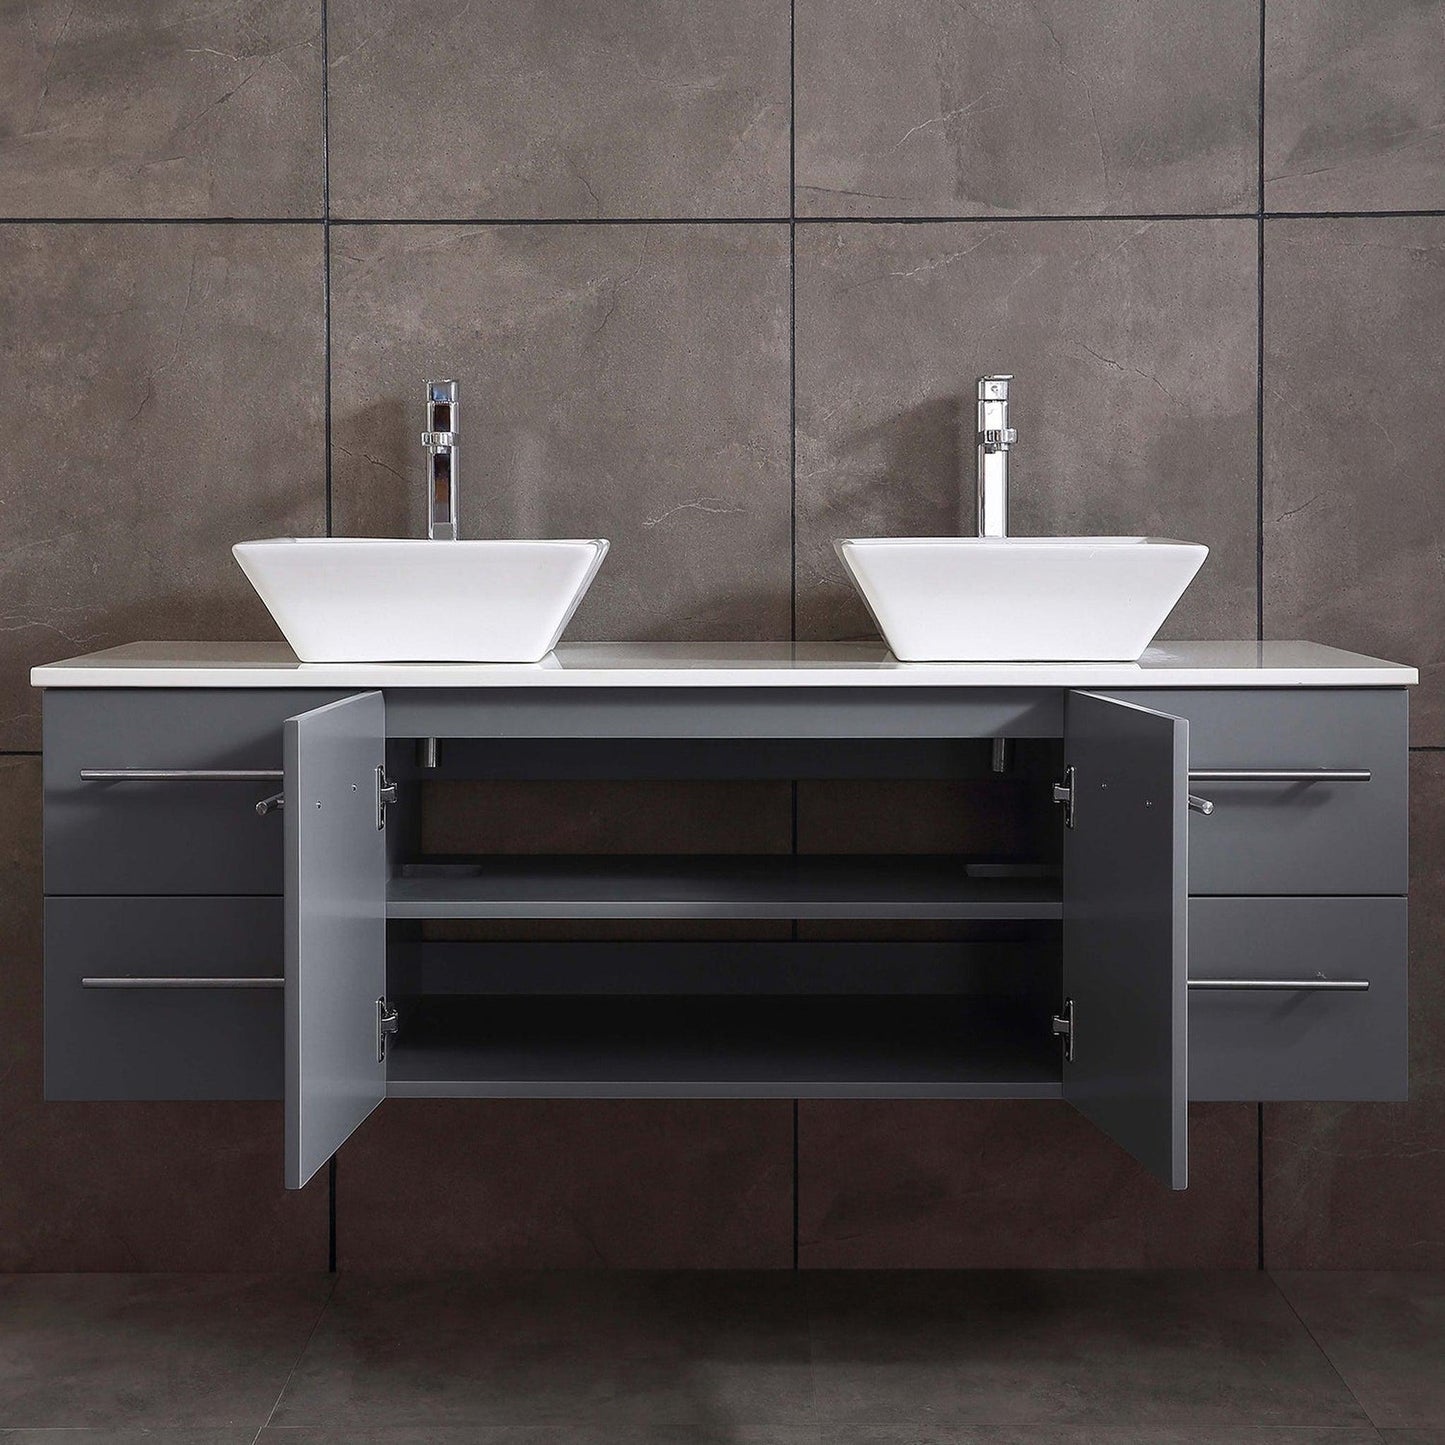 Eviva Totti Wave 72" x 16" Gray Wall-Mounted Bathroom Vanity With White Man-Made Stone Countertop and Double Porcelain Sink